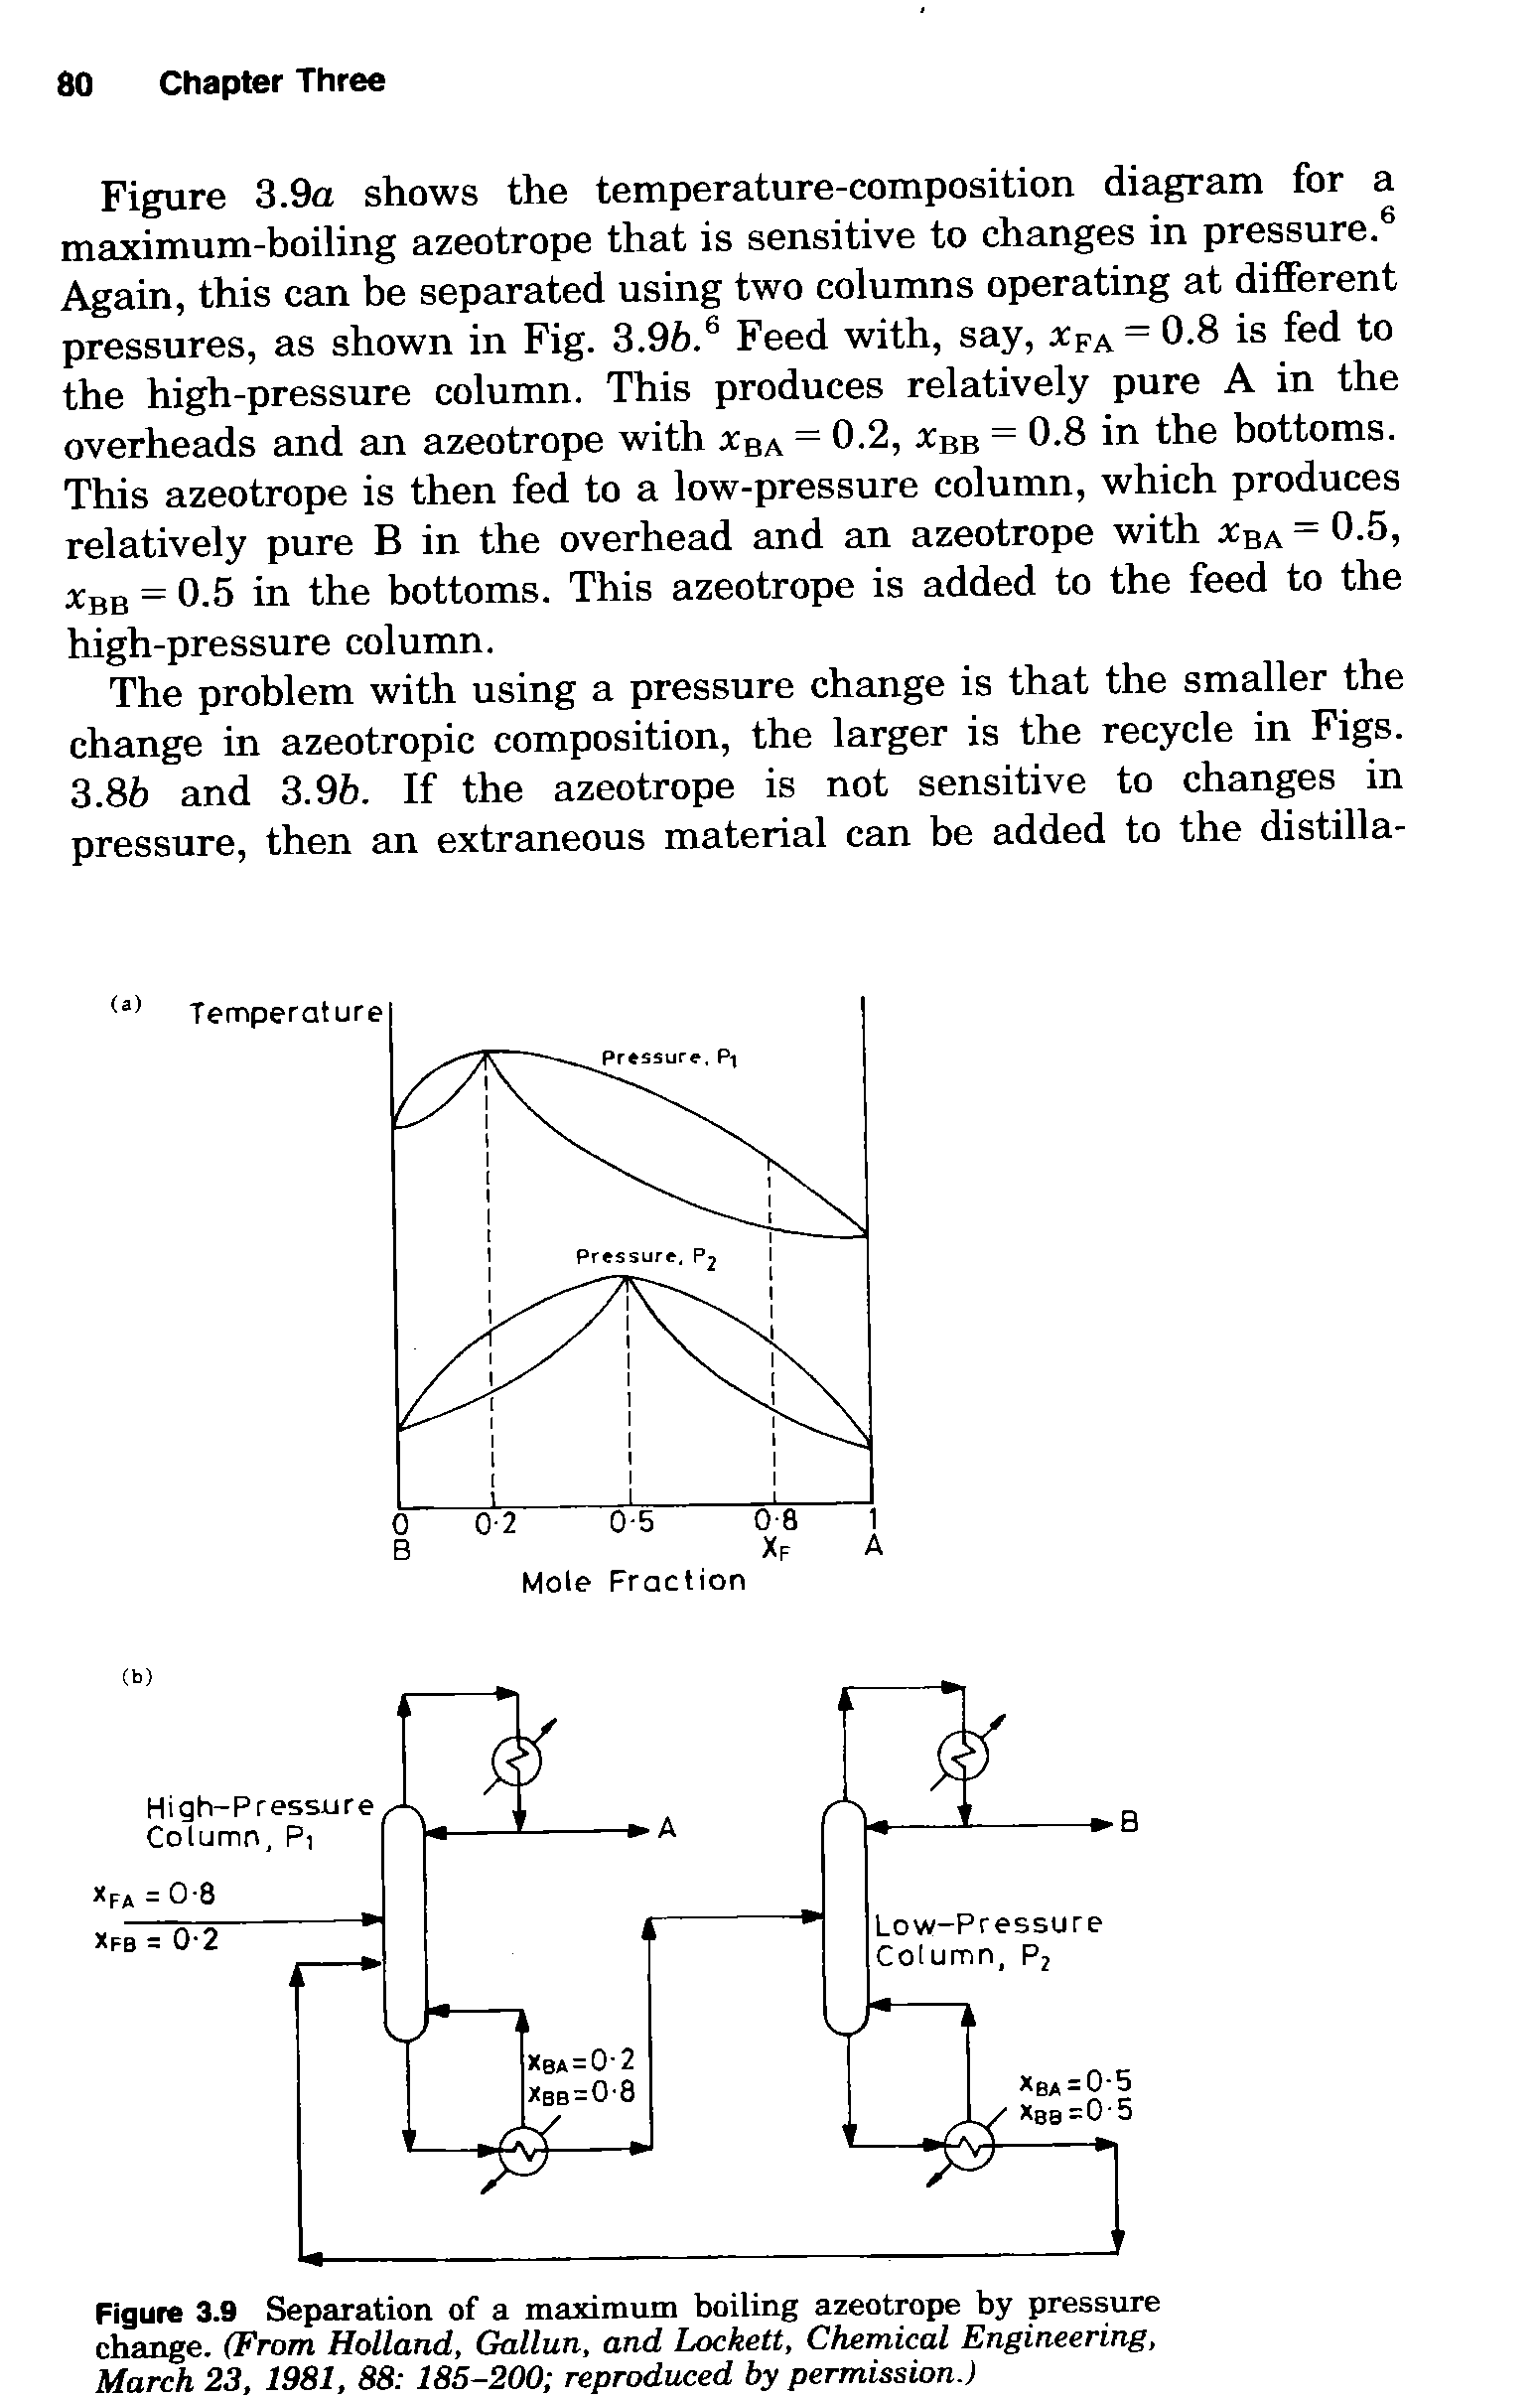 Figure 3.9a shows the temperature-composition diagram for a maximum-boiling azeotrope that is sensitive to changes in pressure. Again, this can be separated using two columns operating at different pressures, as shown in Fig. 3.96. Feed with, say, rpA = 0.8 is fed to the high-pressure column. This produces relatively pure A in the overheads and an azeotrope with xba = 0.2, Xbb = 0.8 in the bottoms. This azeotrope is then fed to a low-pressure column, which produces relatively pure B in the overhead and an azeotrope with 3 ba = 0.5, BB = 0.5 in the bottoms. This azeotrope is added to the feed to the high-pressure column.